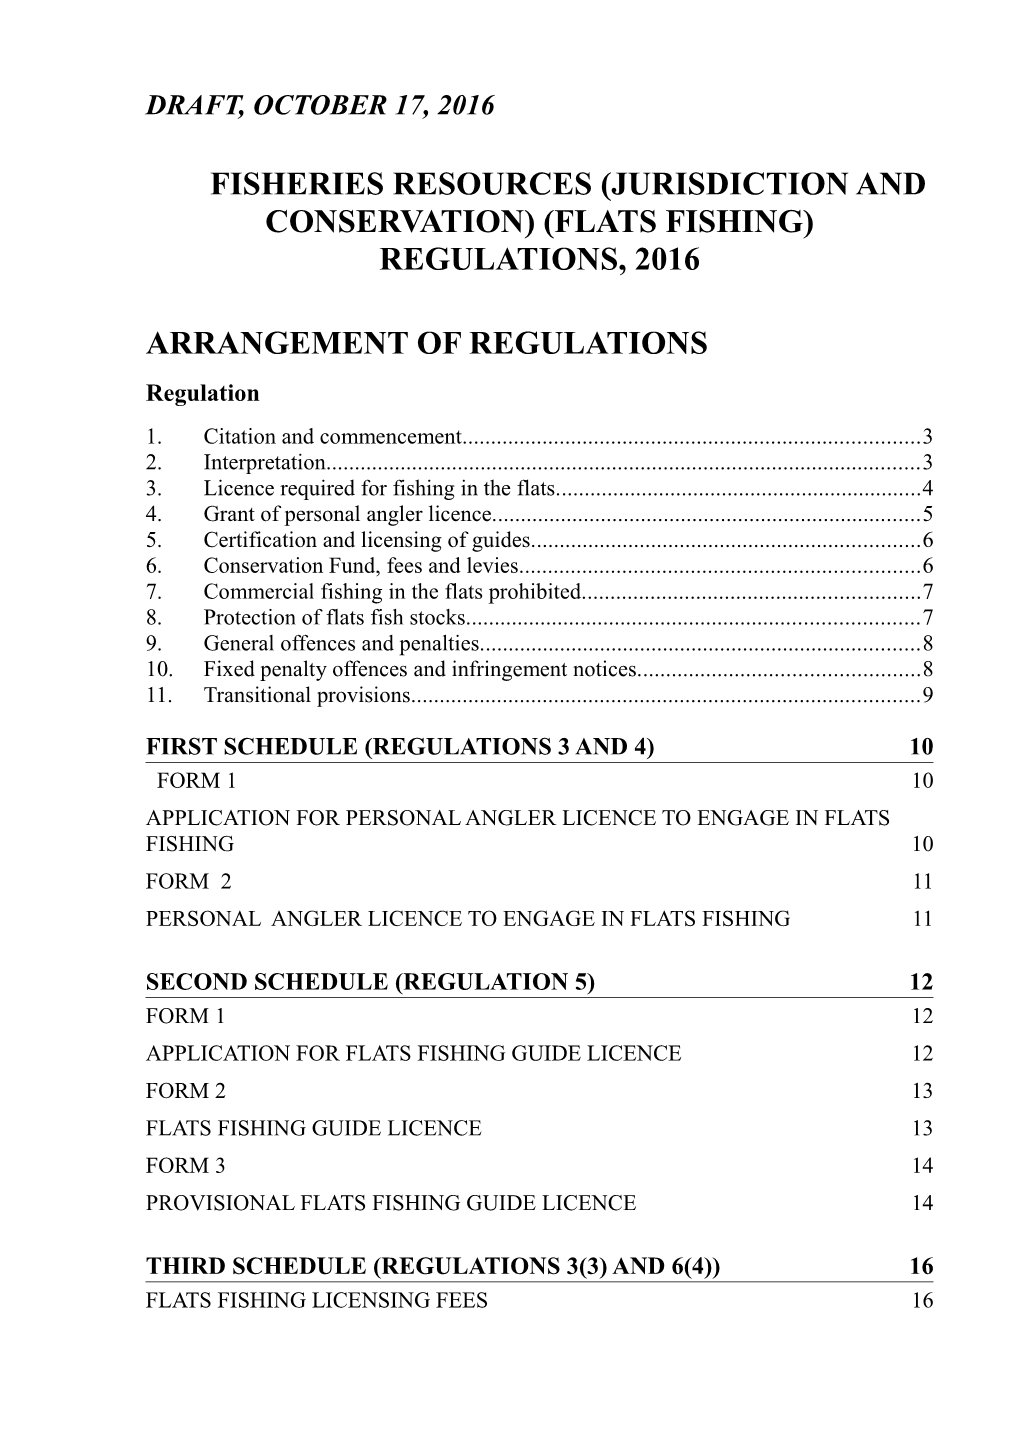 Fisheries Resources (Jurisdiction and Conservation) (Flats Fishing) Regulations, 2016